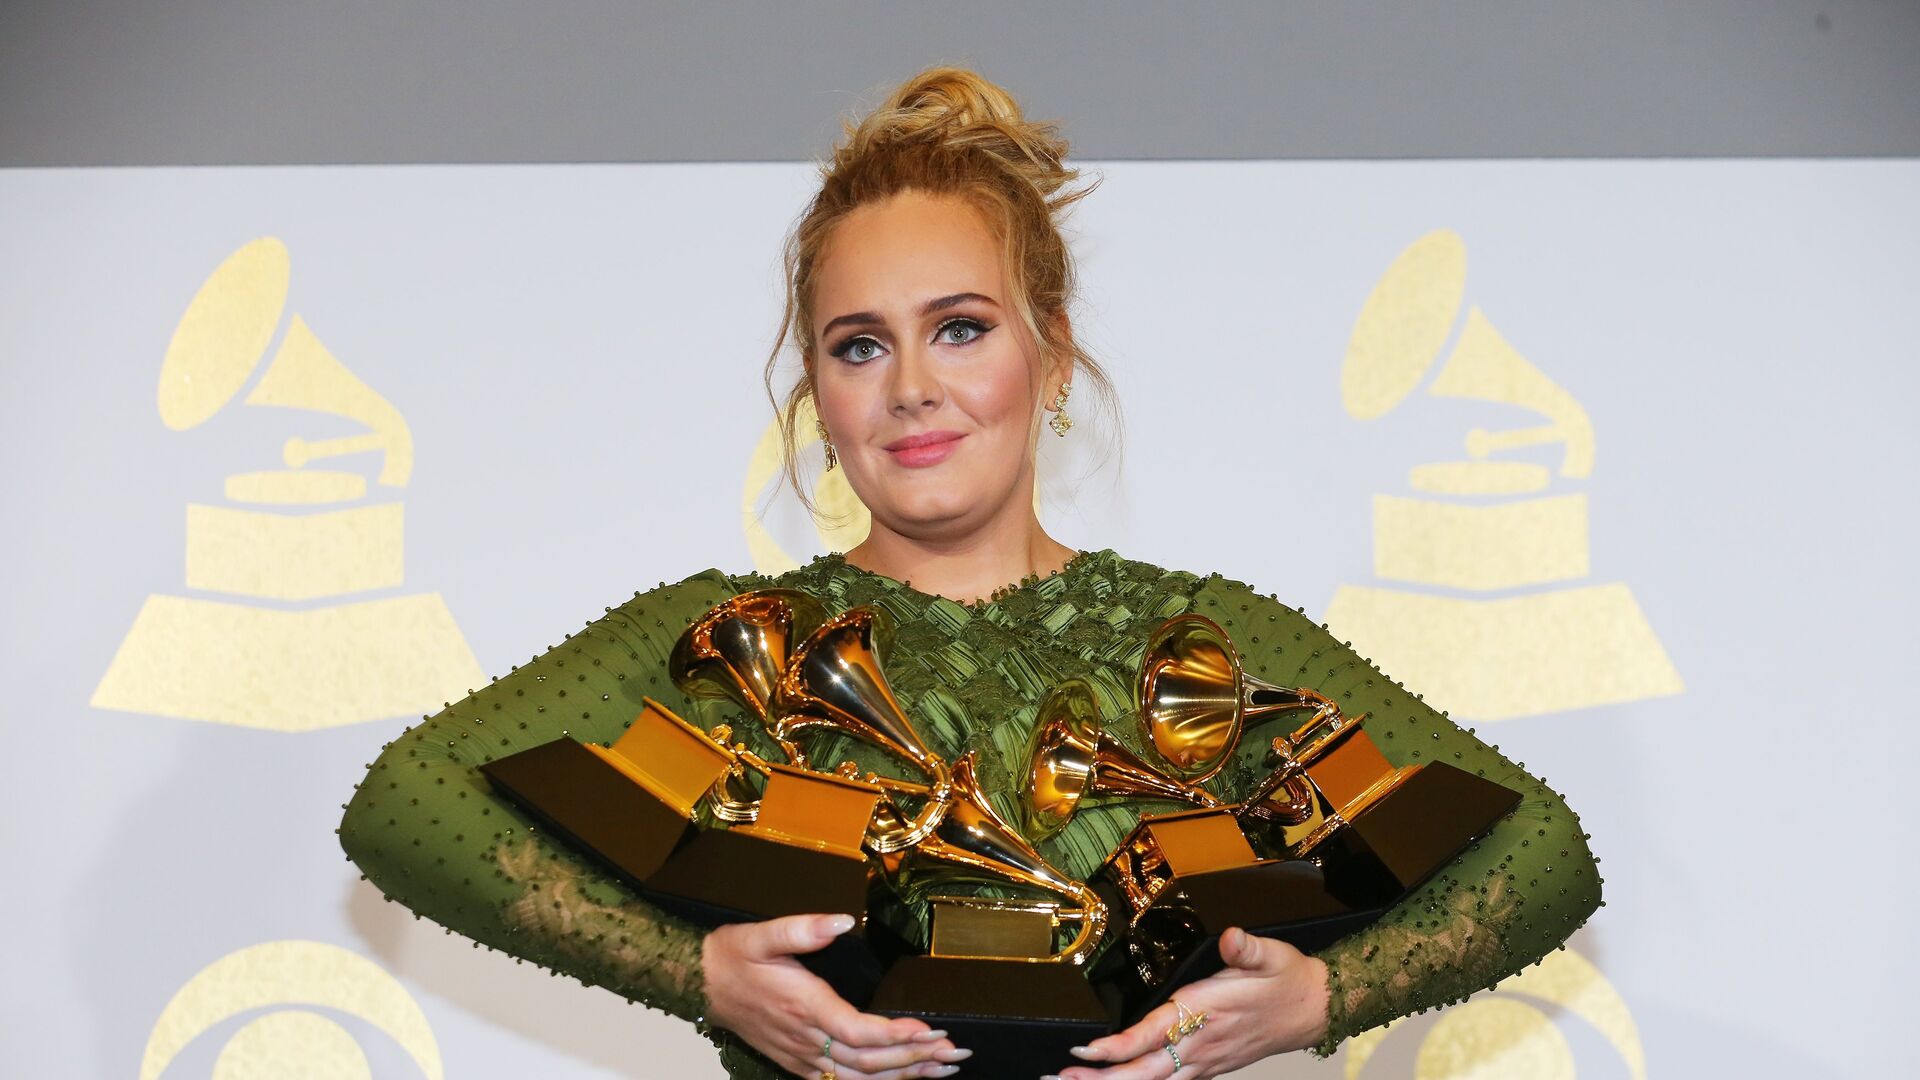 Adele holds the five Grammys she won including Record of the Year for Hello and Album of the Year for 25 during the 59th Annual Grammy Awards in Los Angeles, California, U.S. , February 12, 2017 - Sputnik International, 1920, 30.01.2022